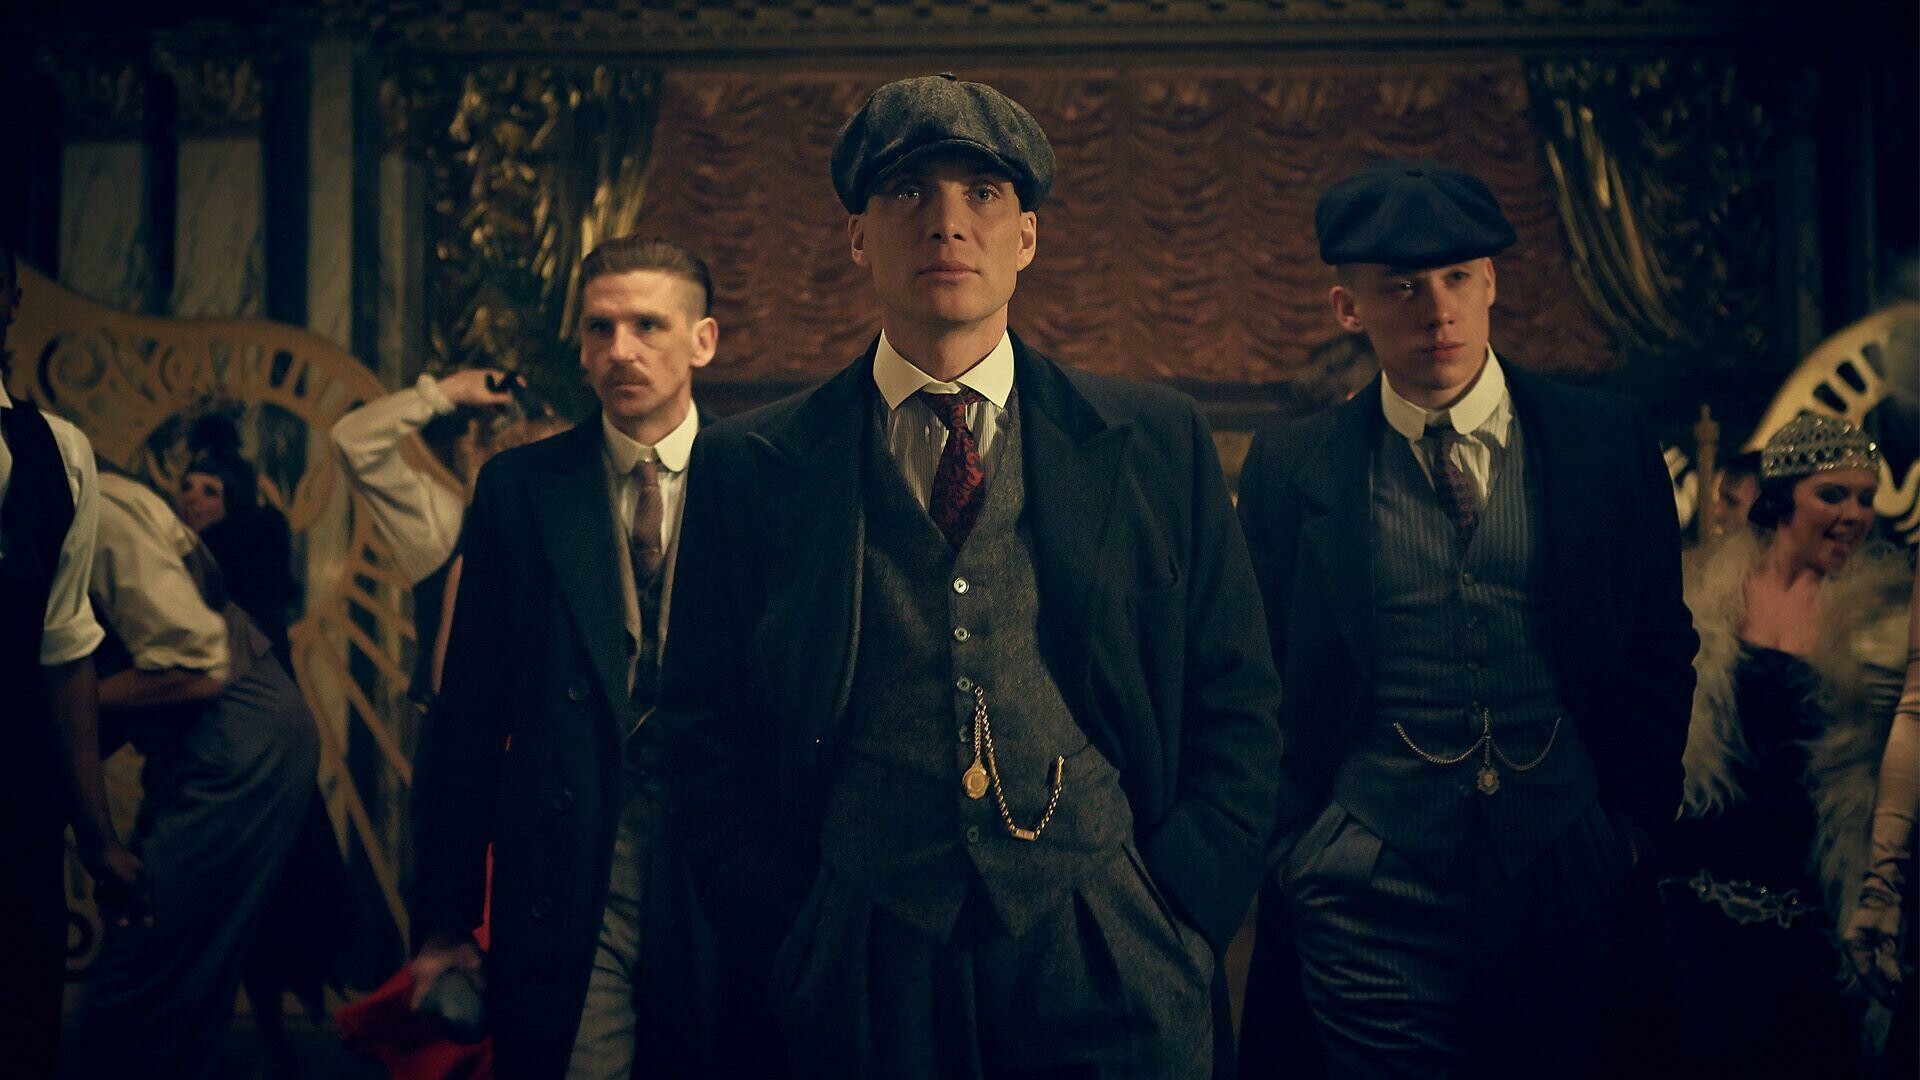 Peaky Blinders: Period gangster drama with Cillian Murphy and Sam Neill. 1920x1080 Full HD Wallpaper.